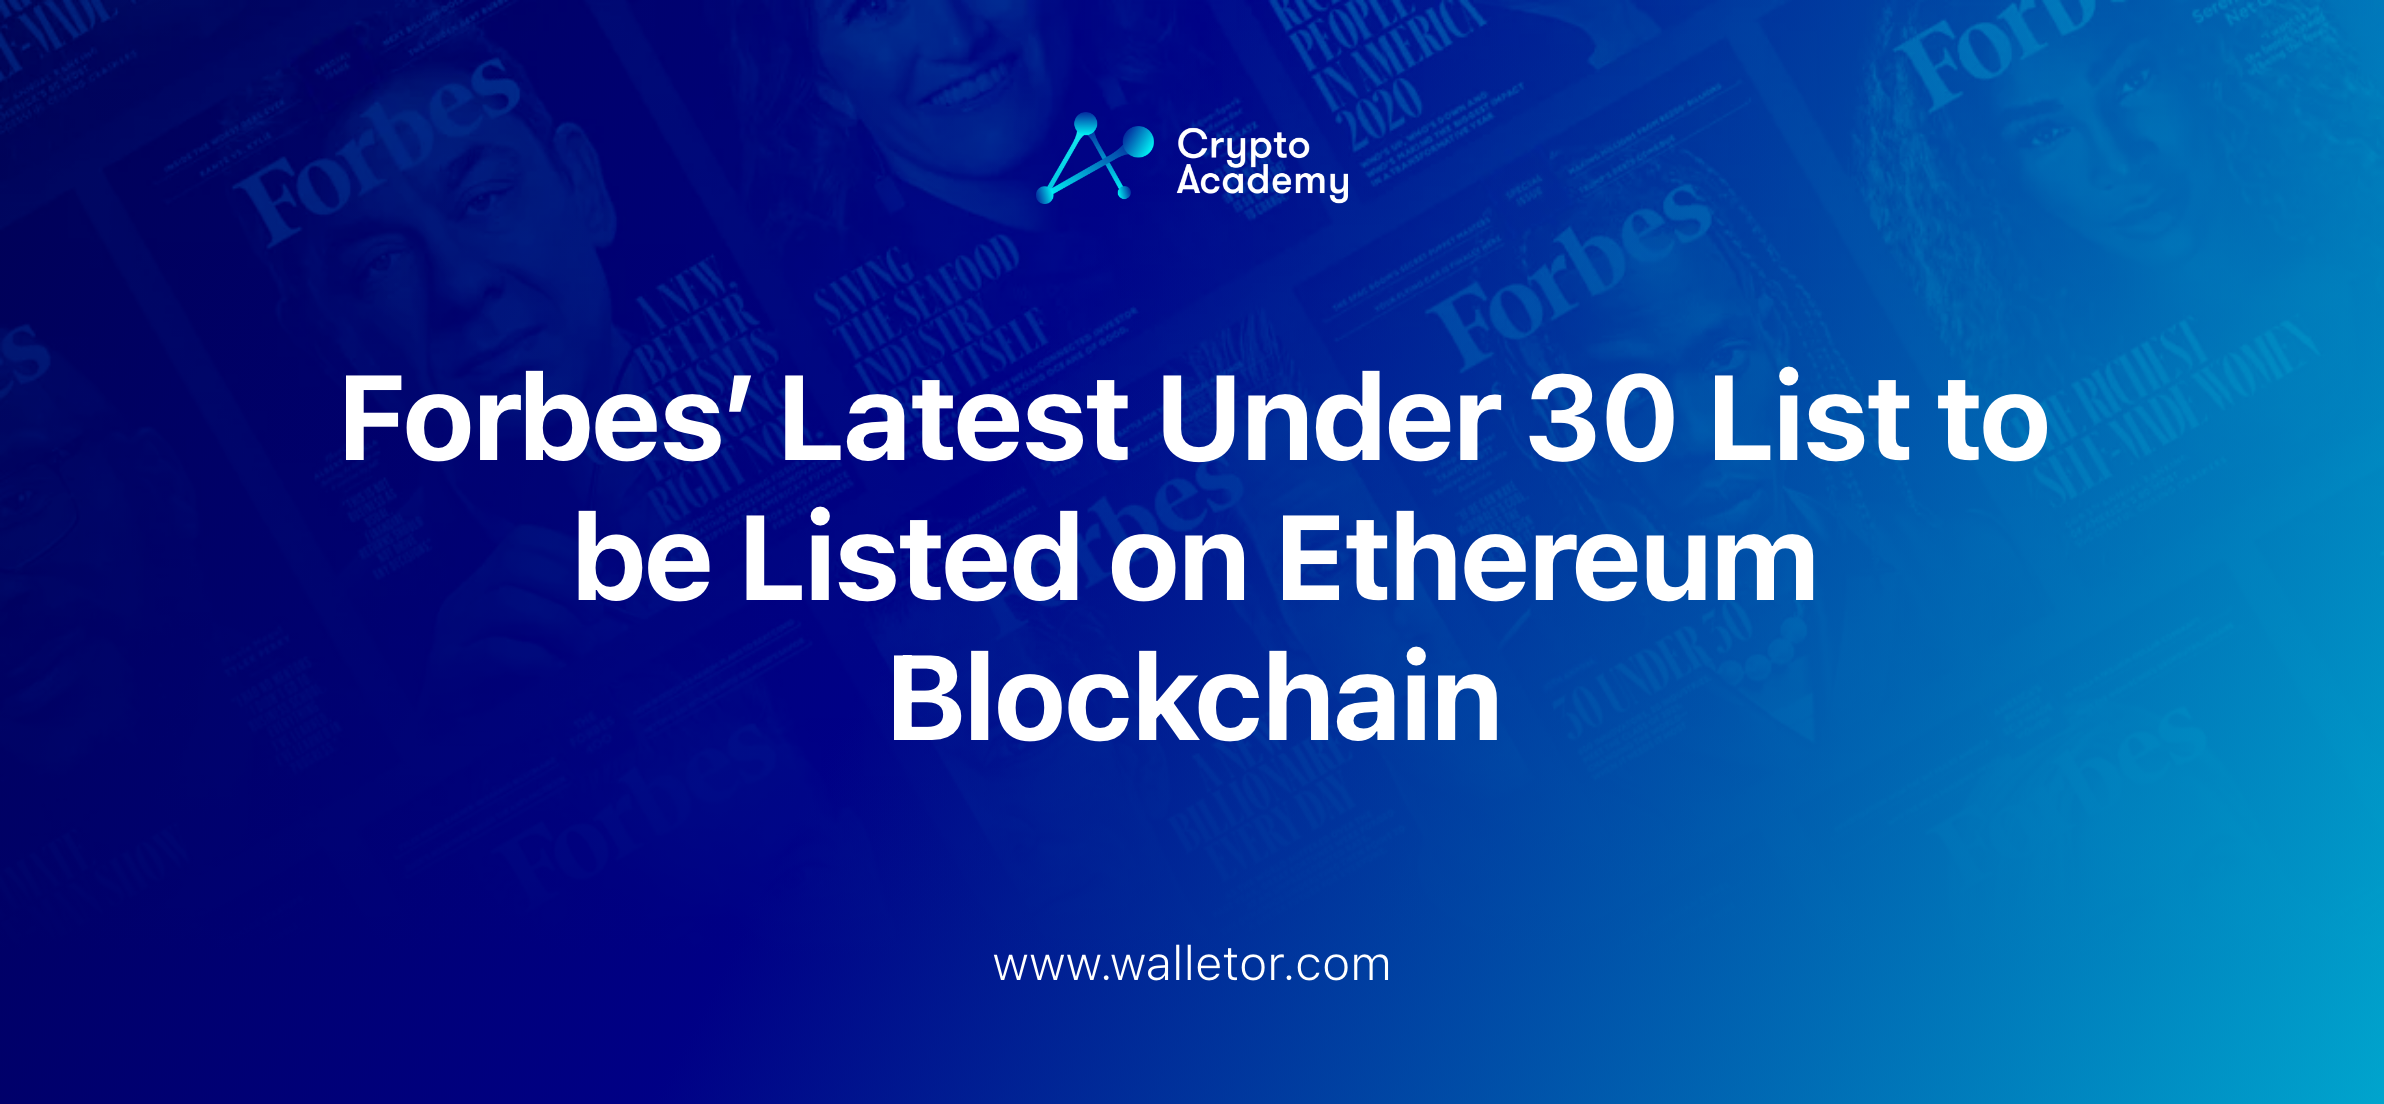 Forbes’ Latest Under 30 List to be Listed on Ethereum Blockchain